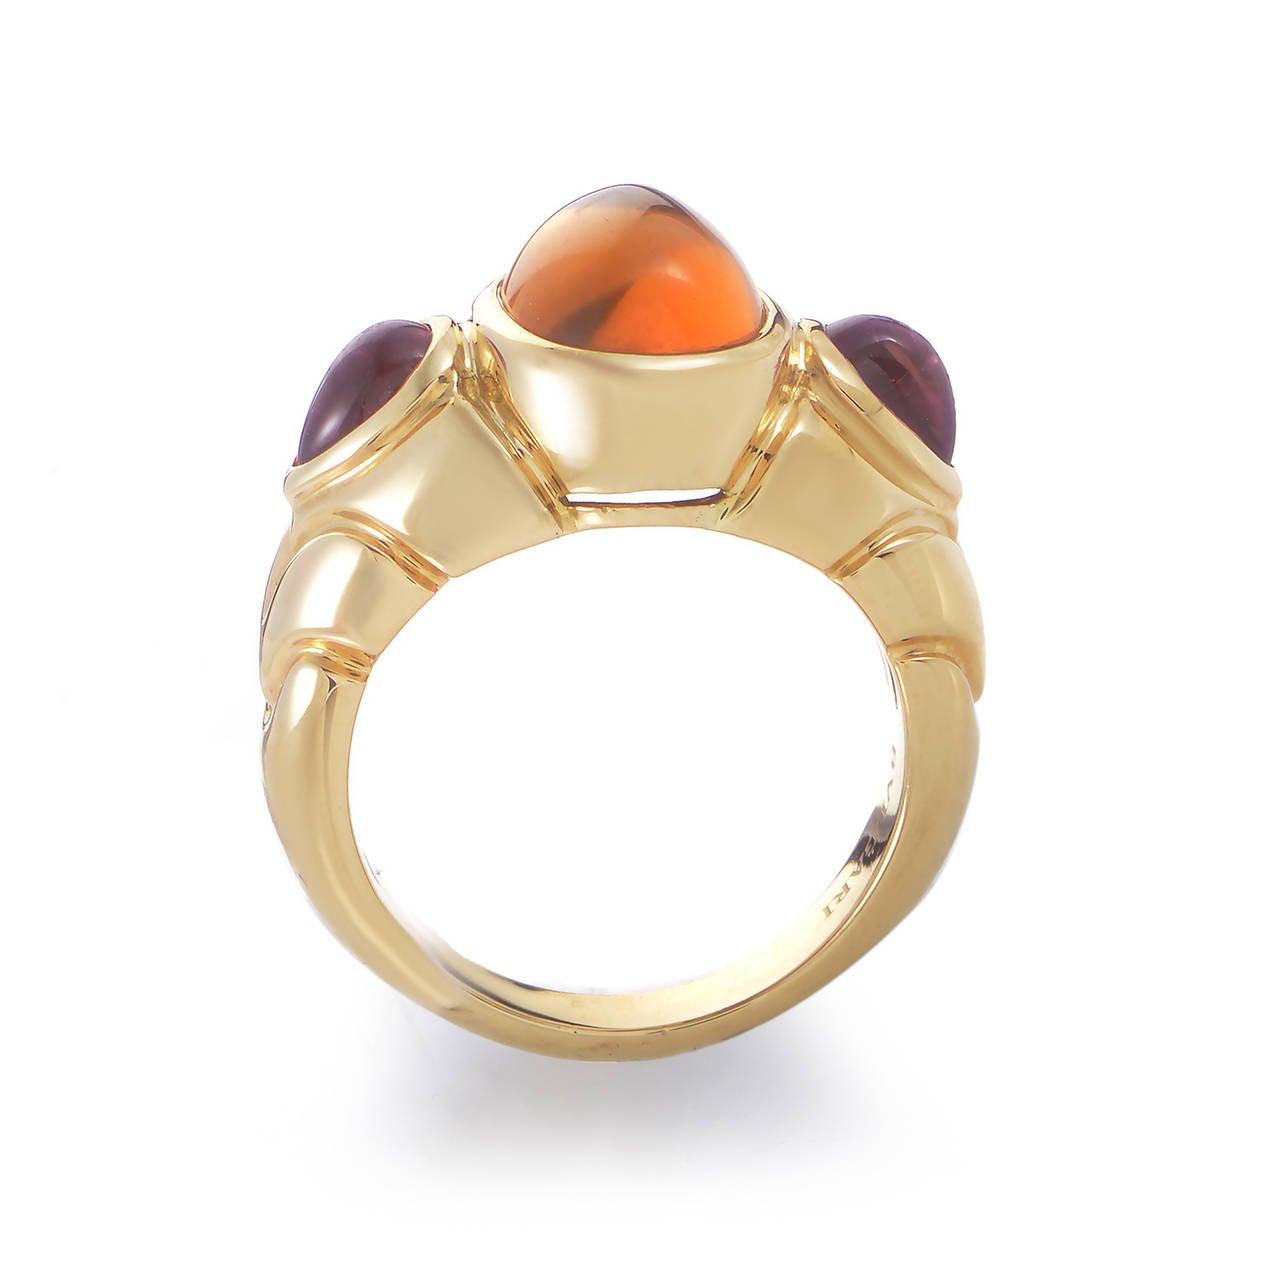 With the memorable carvings on the 18K yellow gold body characteristic for the brand, this fantastic ring from Bulgari boasts a warm, delightful combination of two pink tourmalines and a stunning citrine stone on the top.
Ring Size: 6.25 (52 1/8)